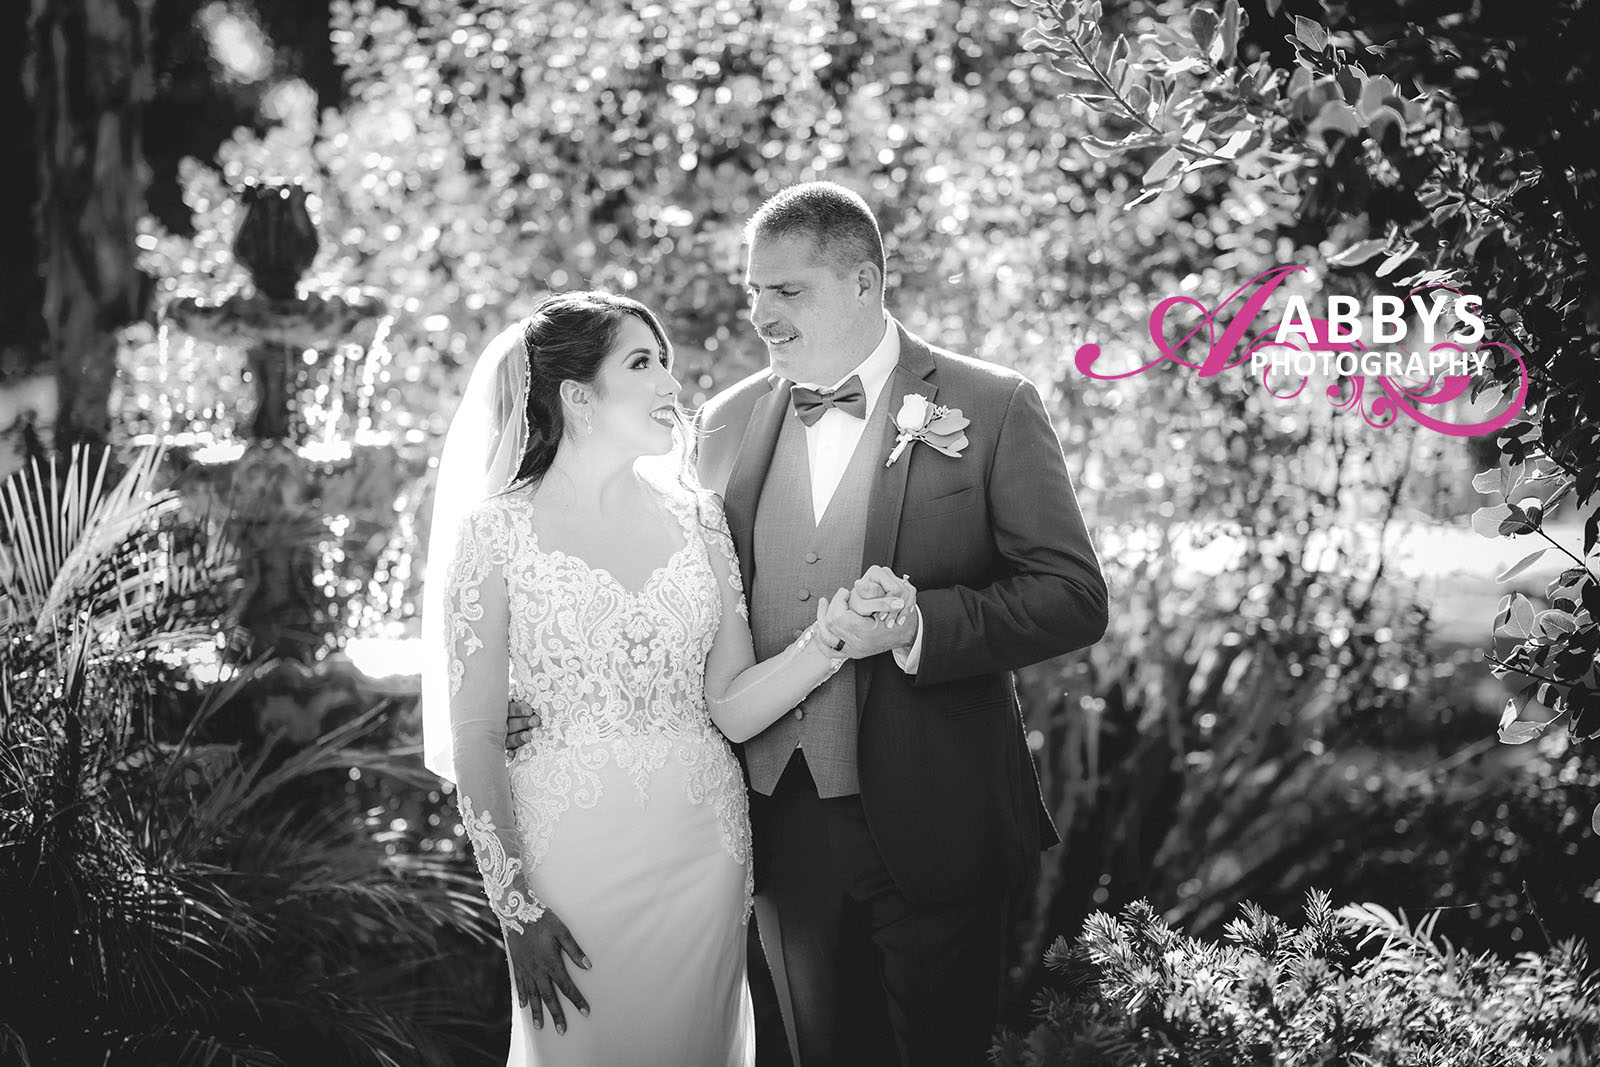 Wedding photography or engagement photography can be just as effective in black and white as in color. 